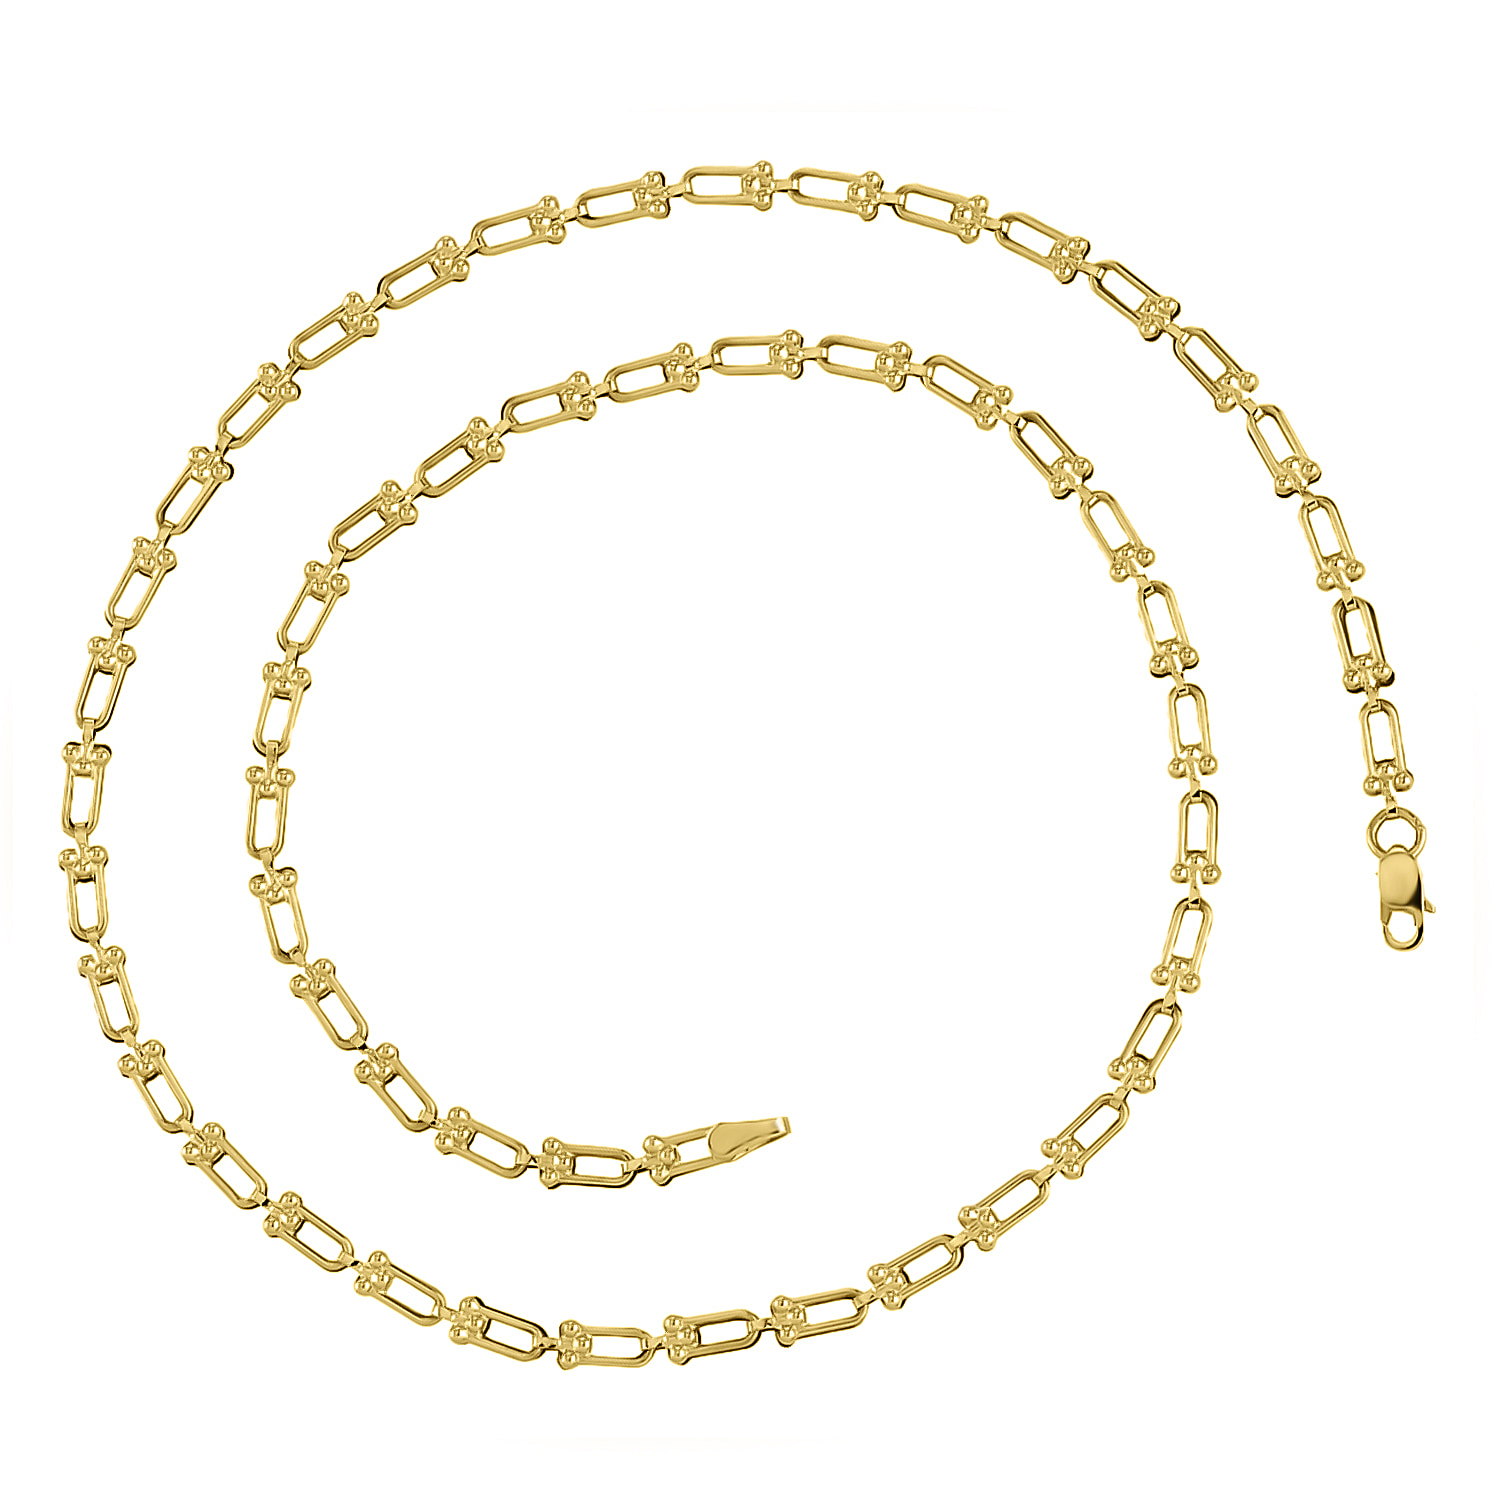 Manhatten Designer Close Out - 9K Yellow Gold Industrial Link Necklace (Size - 20)